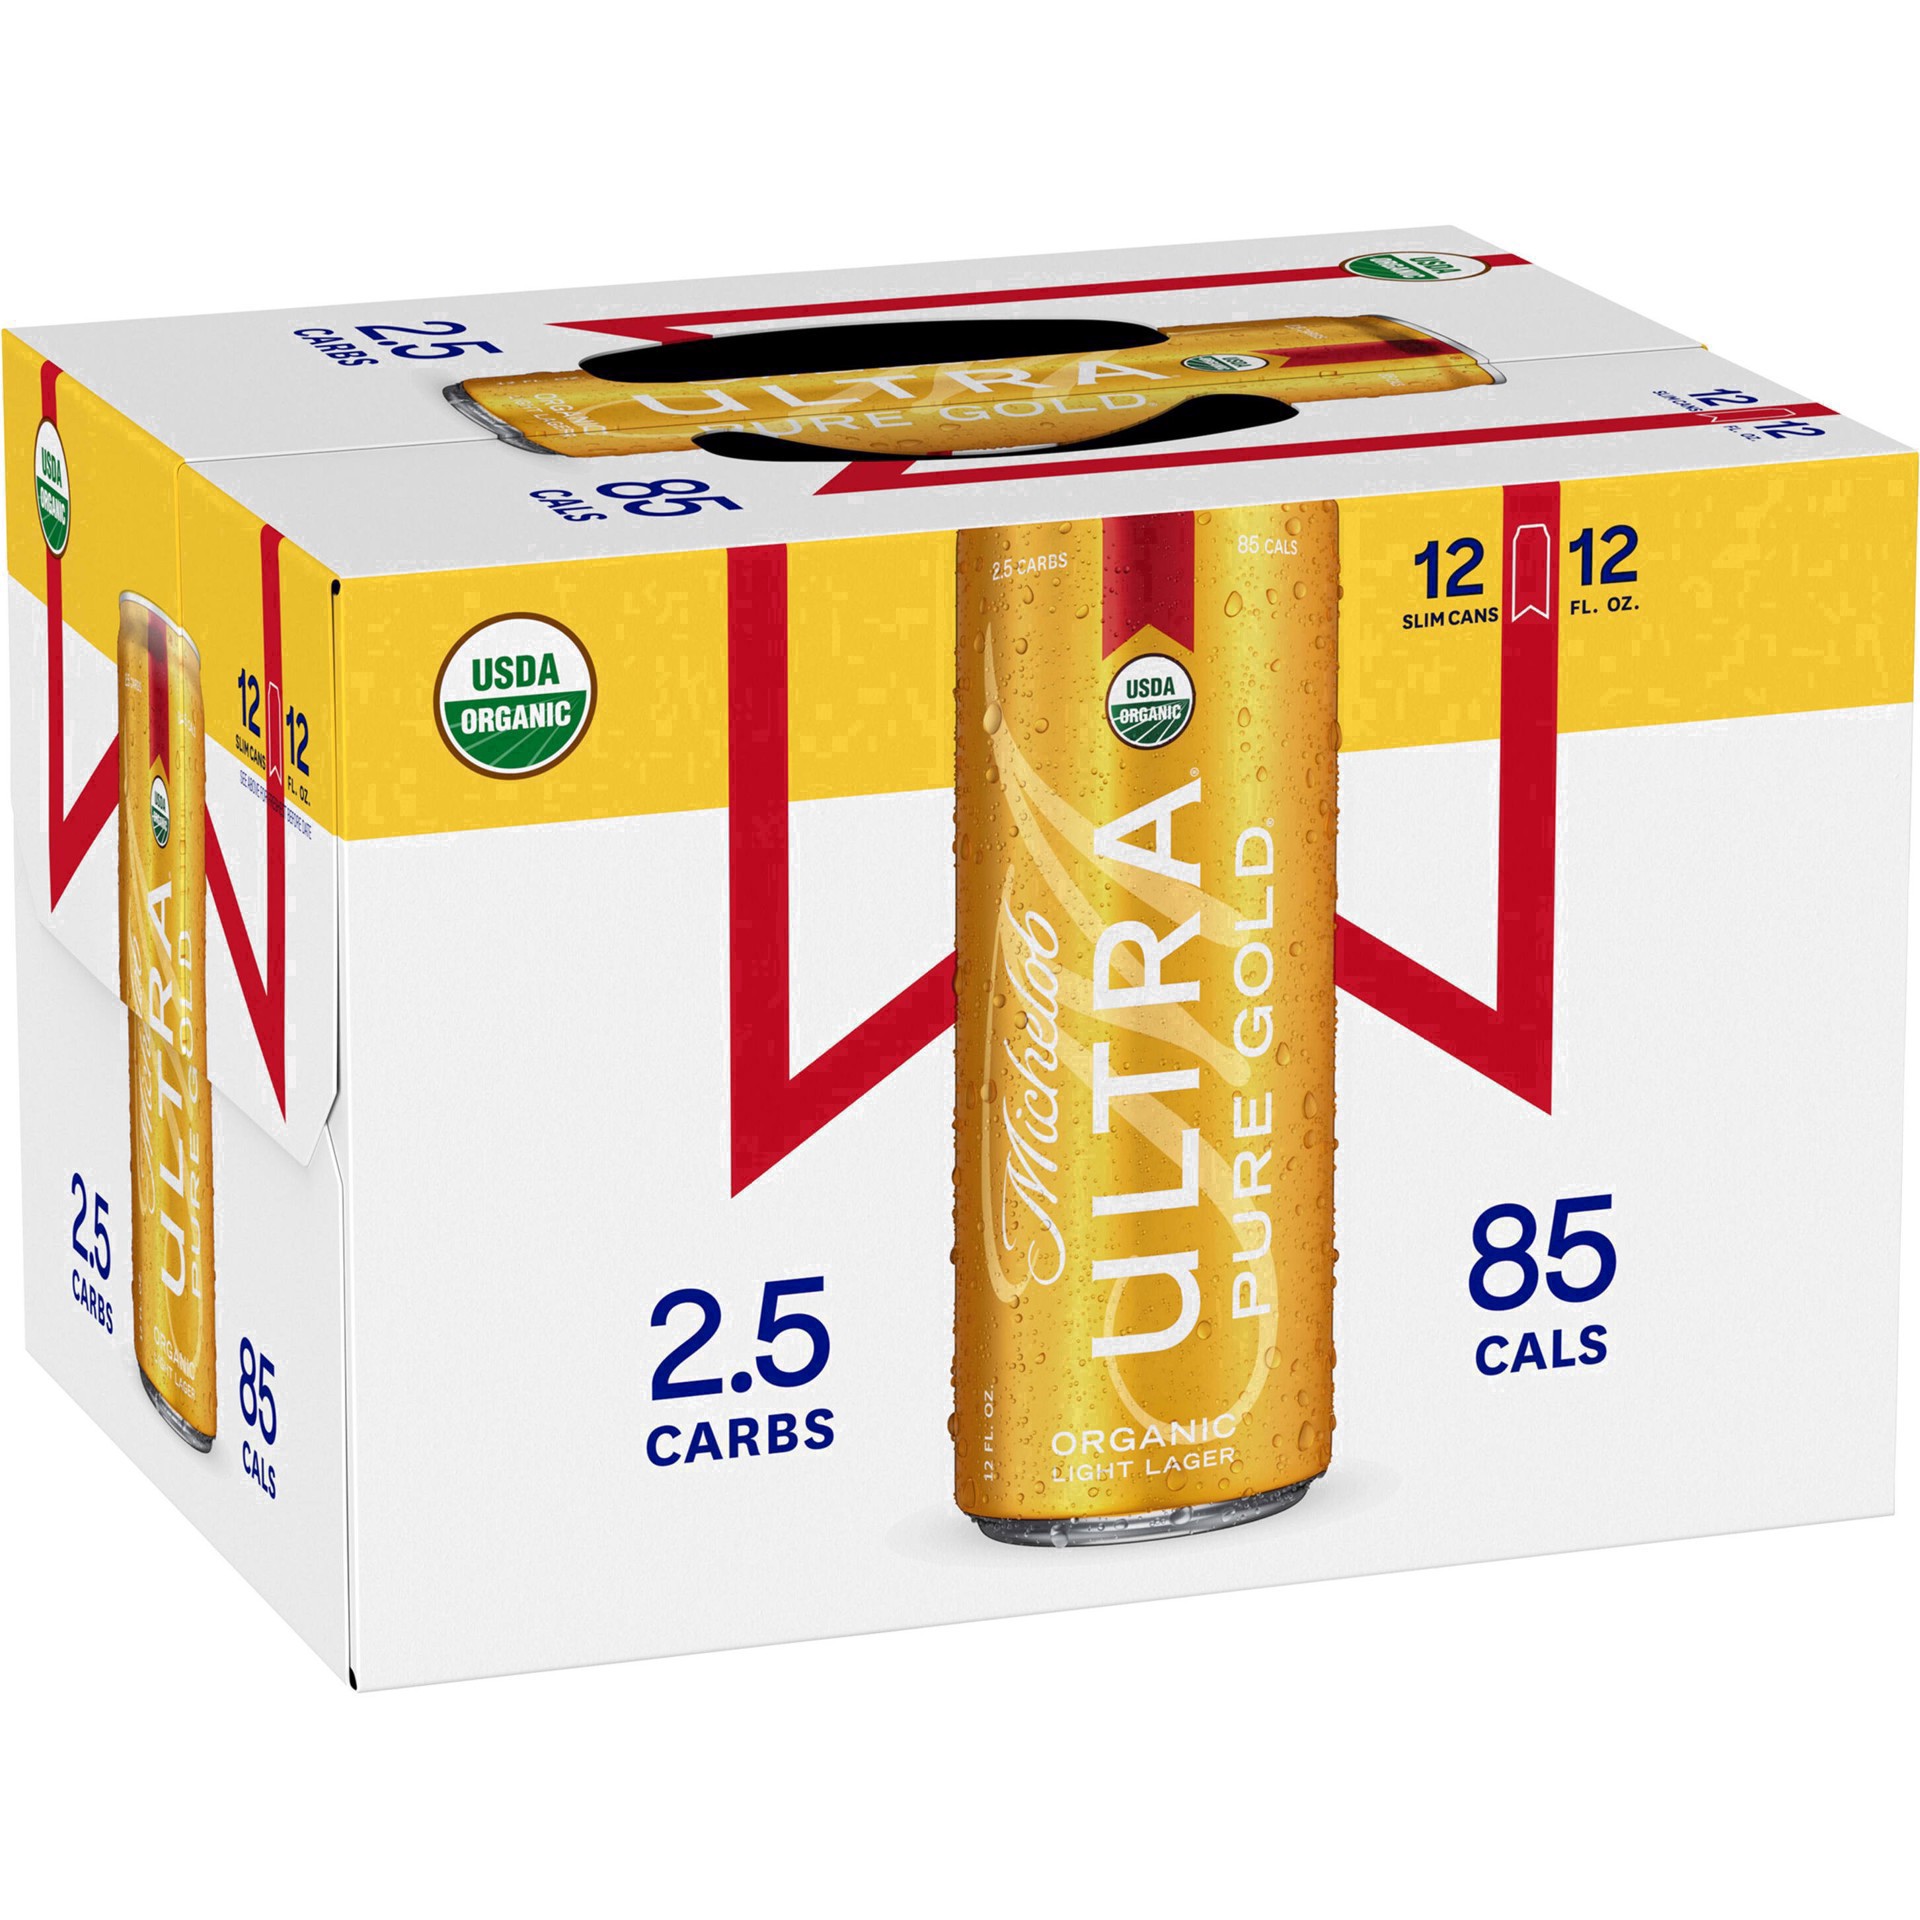 Michelob Ultra Pure Gold Organic Light Lager Beer 12 Ct 12 Oz Shipt